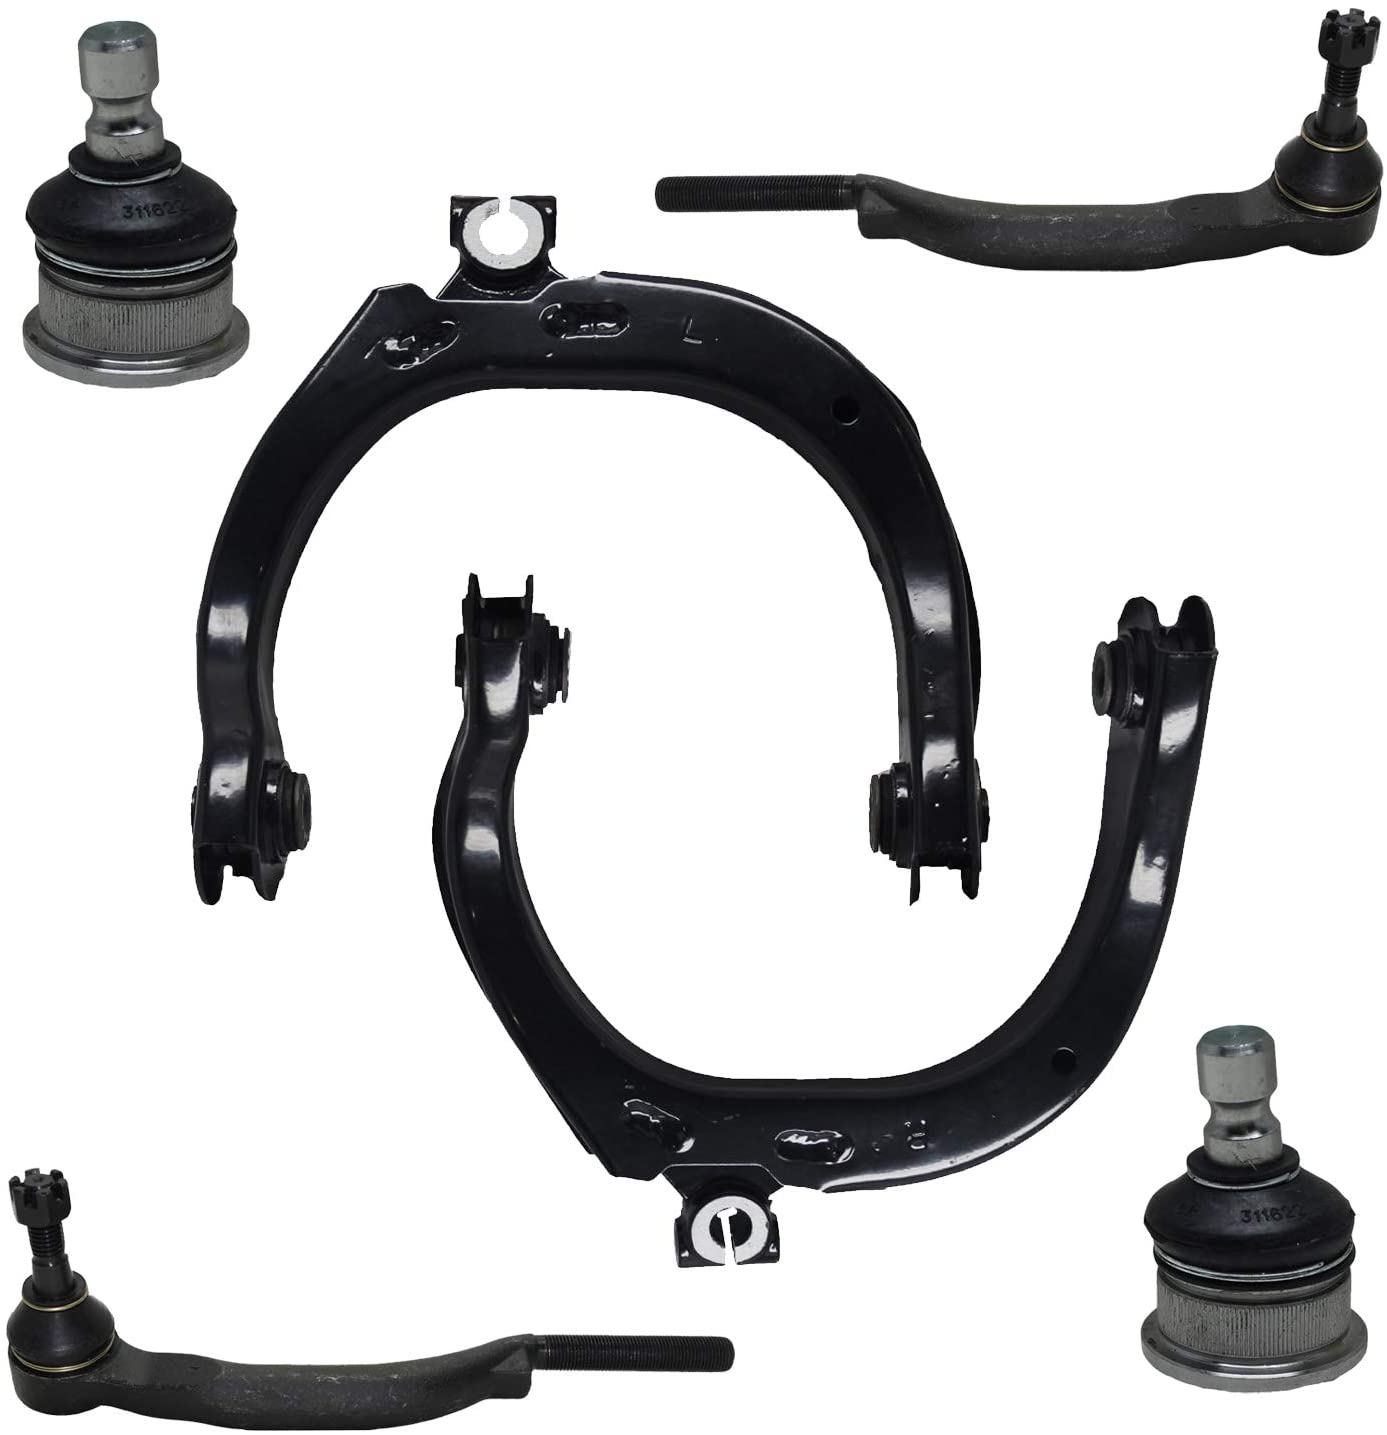 Detroit Axle - 6pc Front Upper Control Arms, Ball Joints & Outer Tie Rods for 2002-2007 Buick Chevy GMC Isuzu Oldsmobile 16mm Thread Models - See Fitment